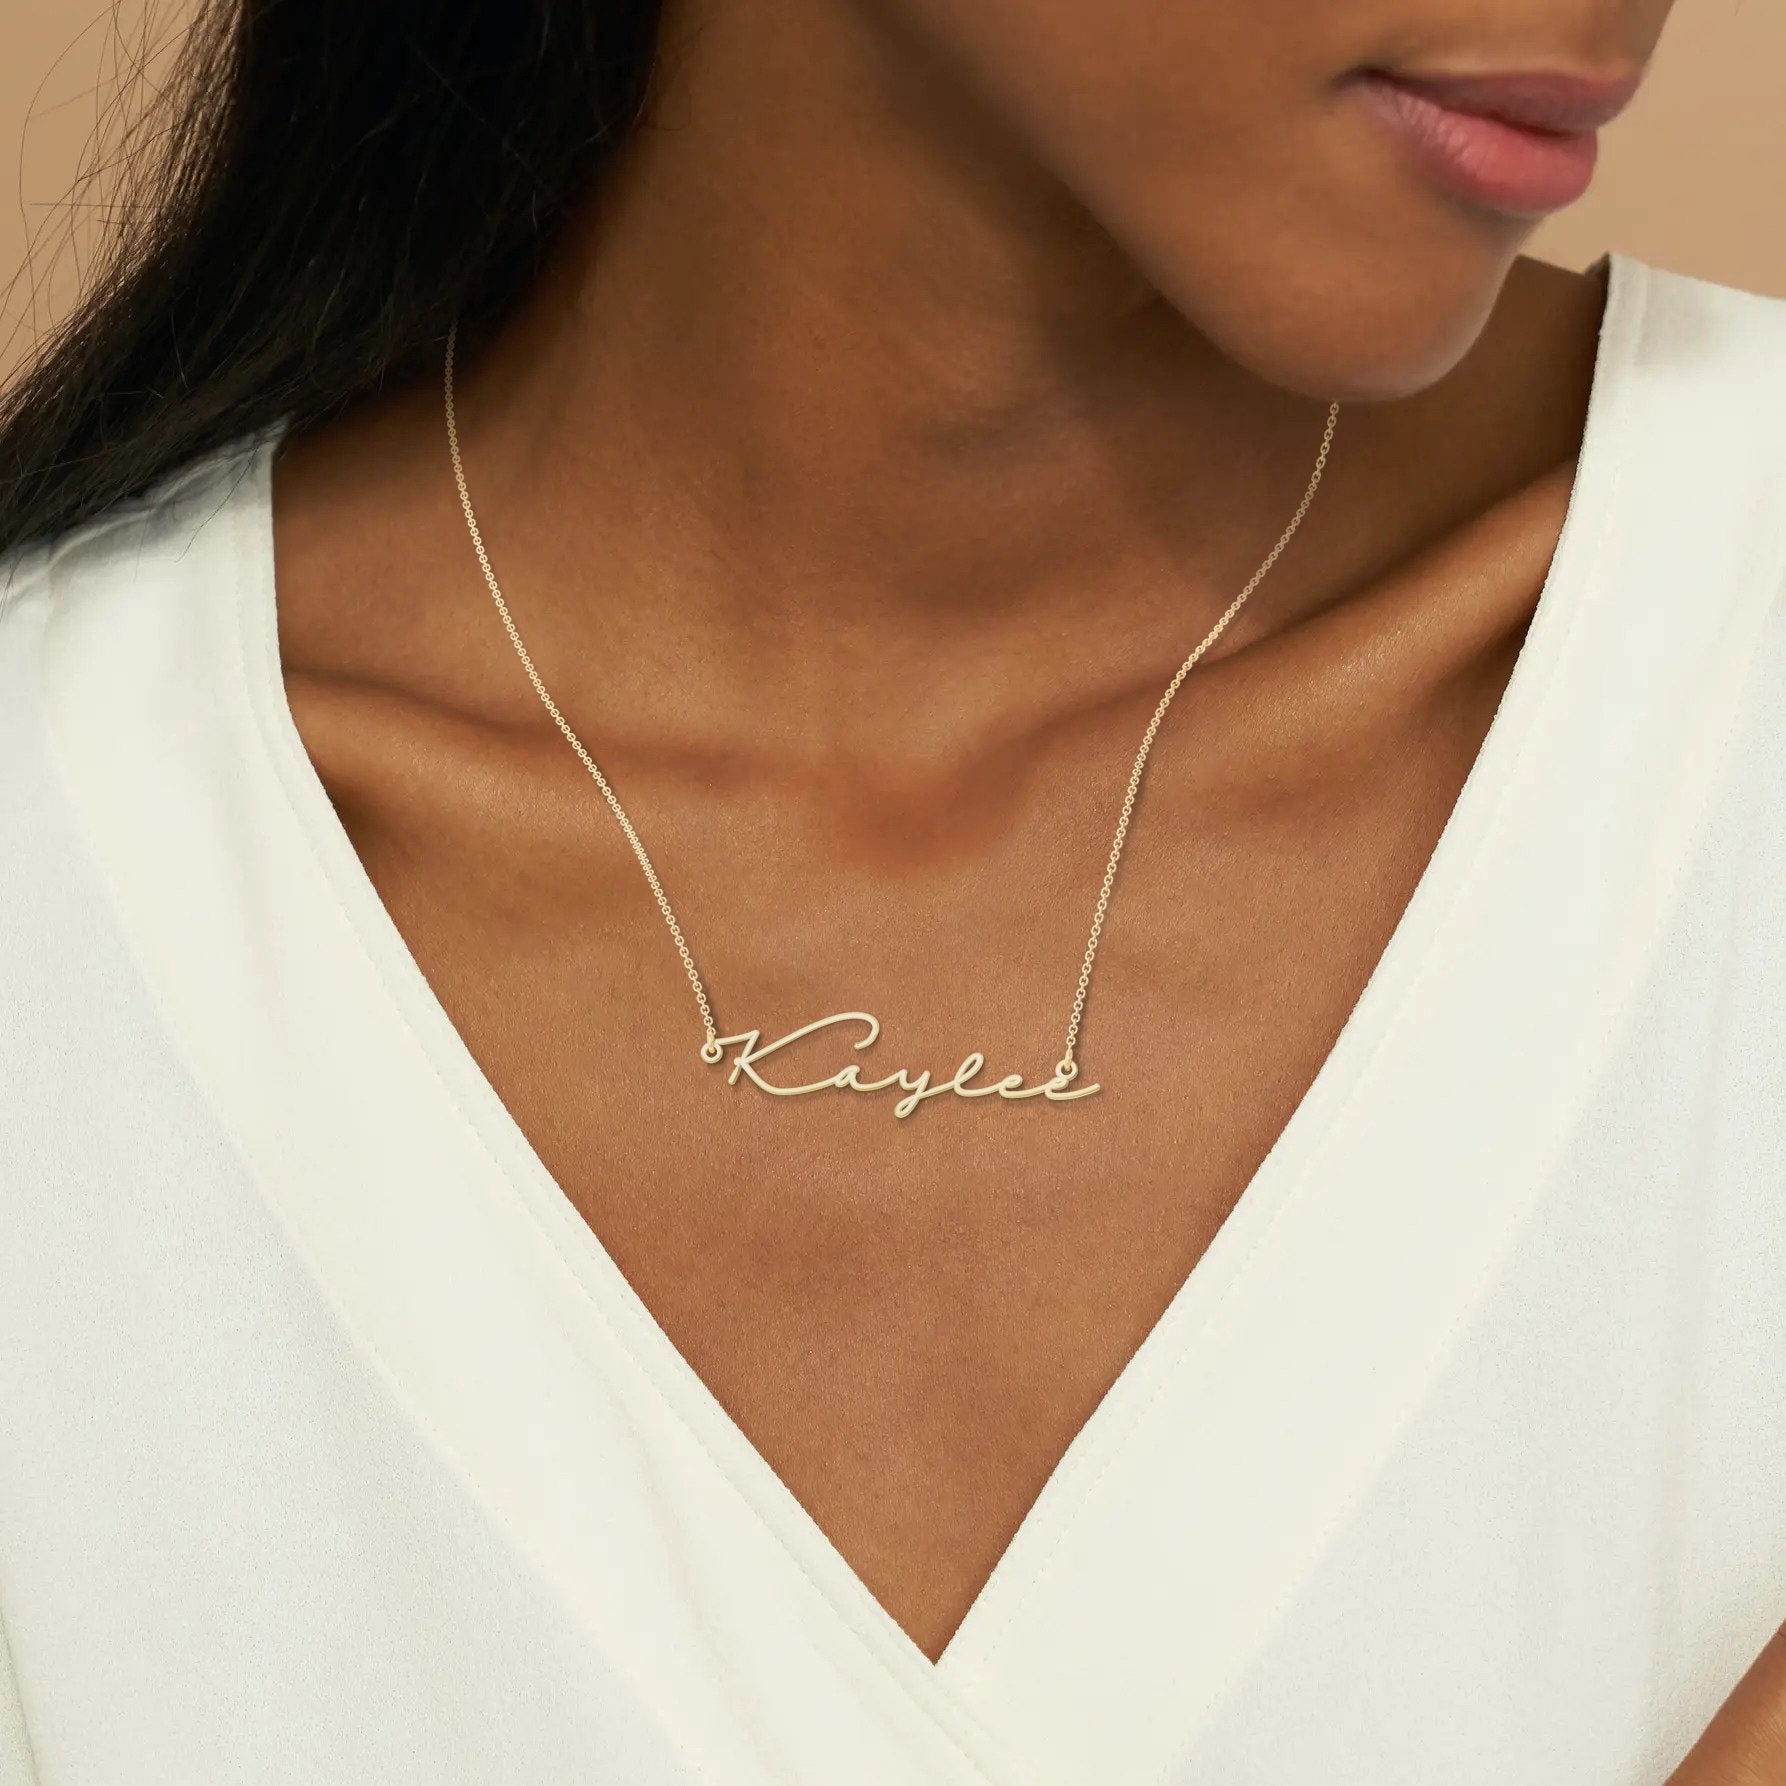 Mon Amour Personalized Name Necklace